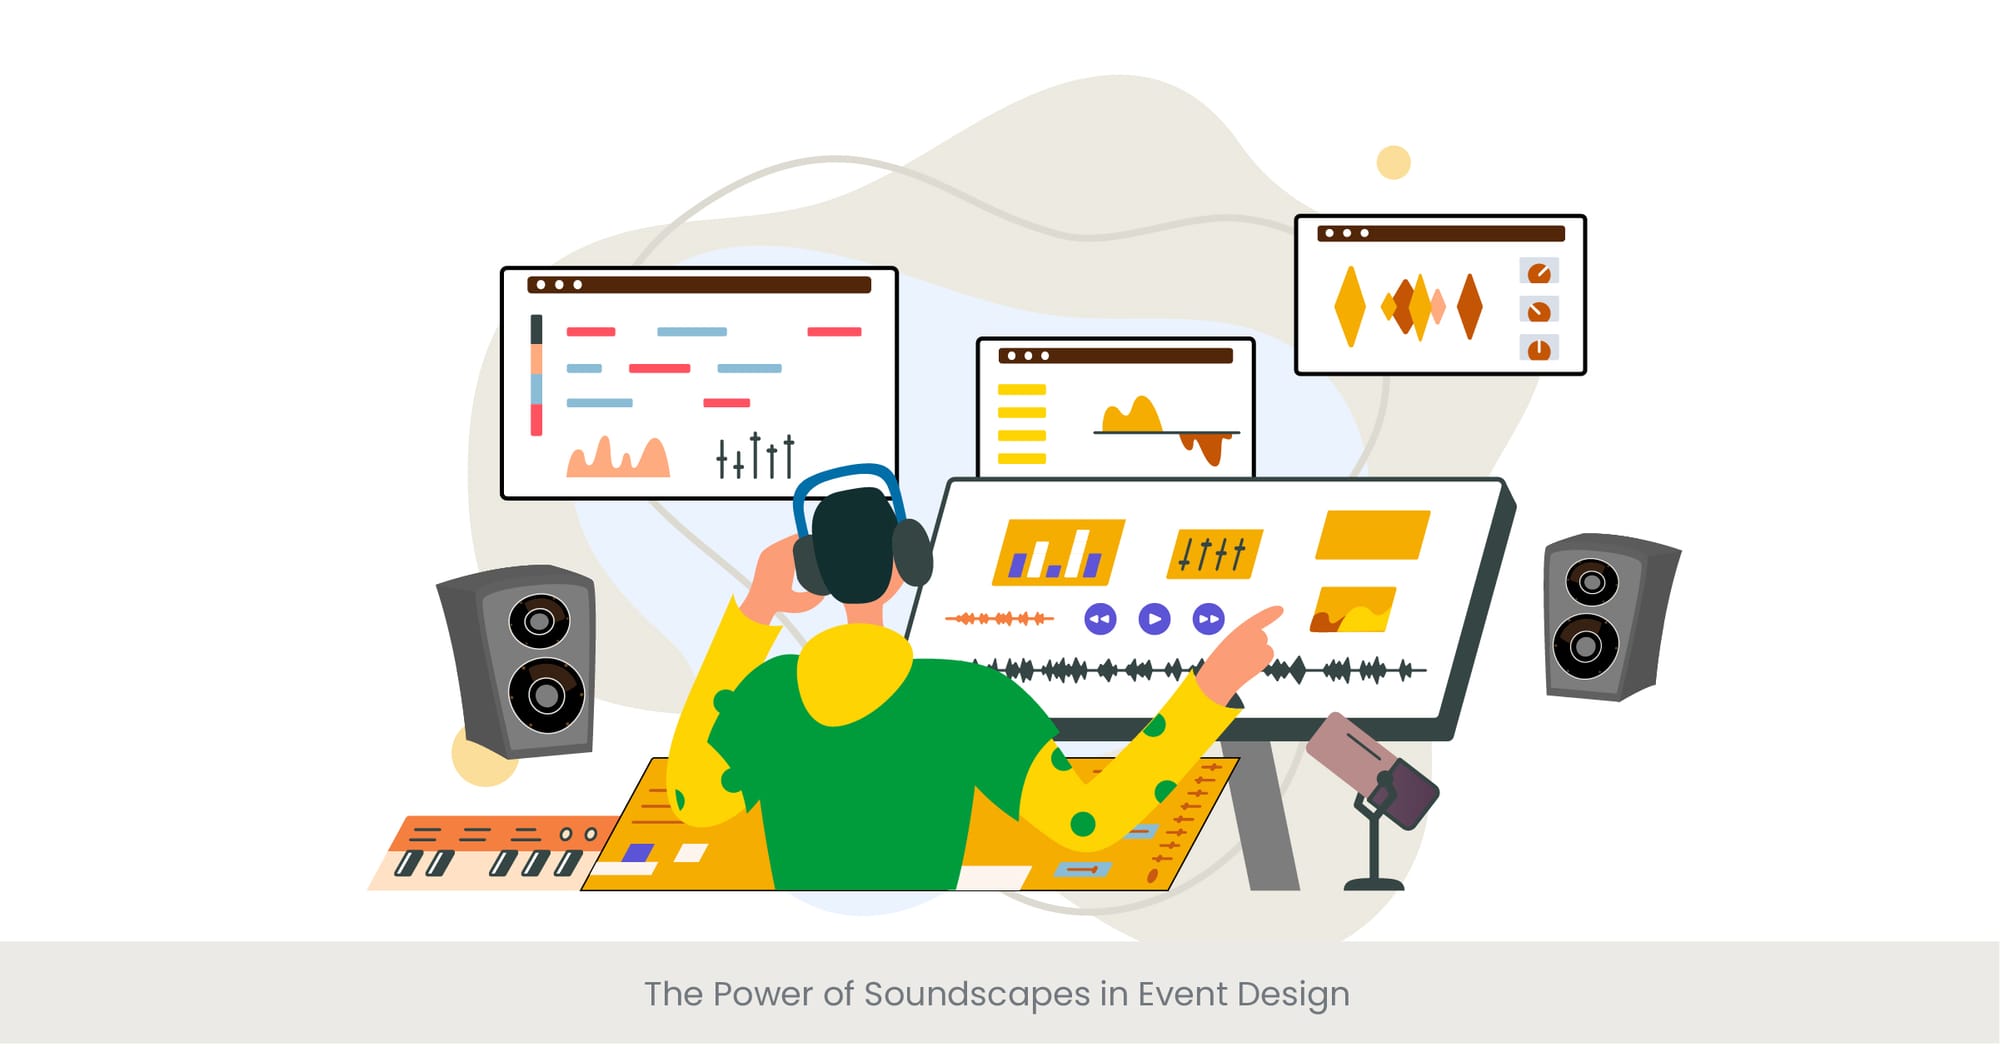 The Power of Soundscapes in Event Design